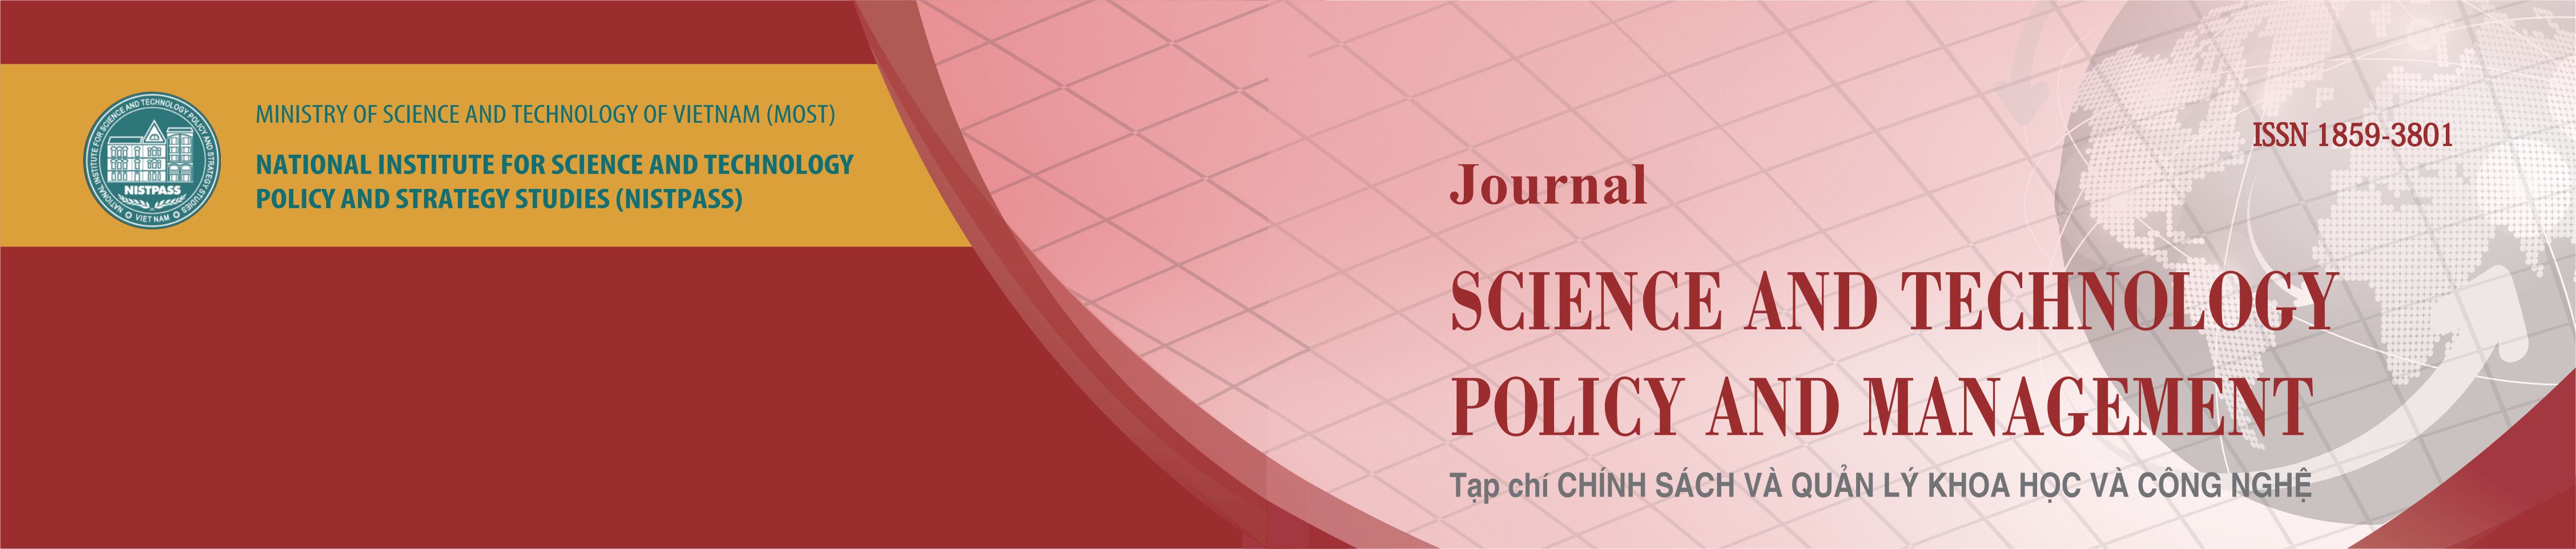 Journal of SCIENCE AND TECHNOLOGY POLICIES AND MANAGEMENT